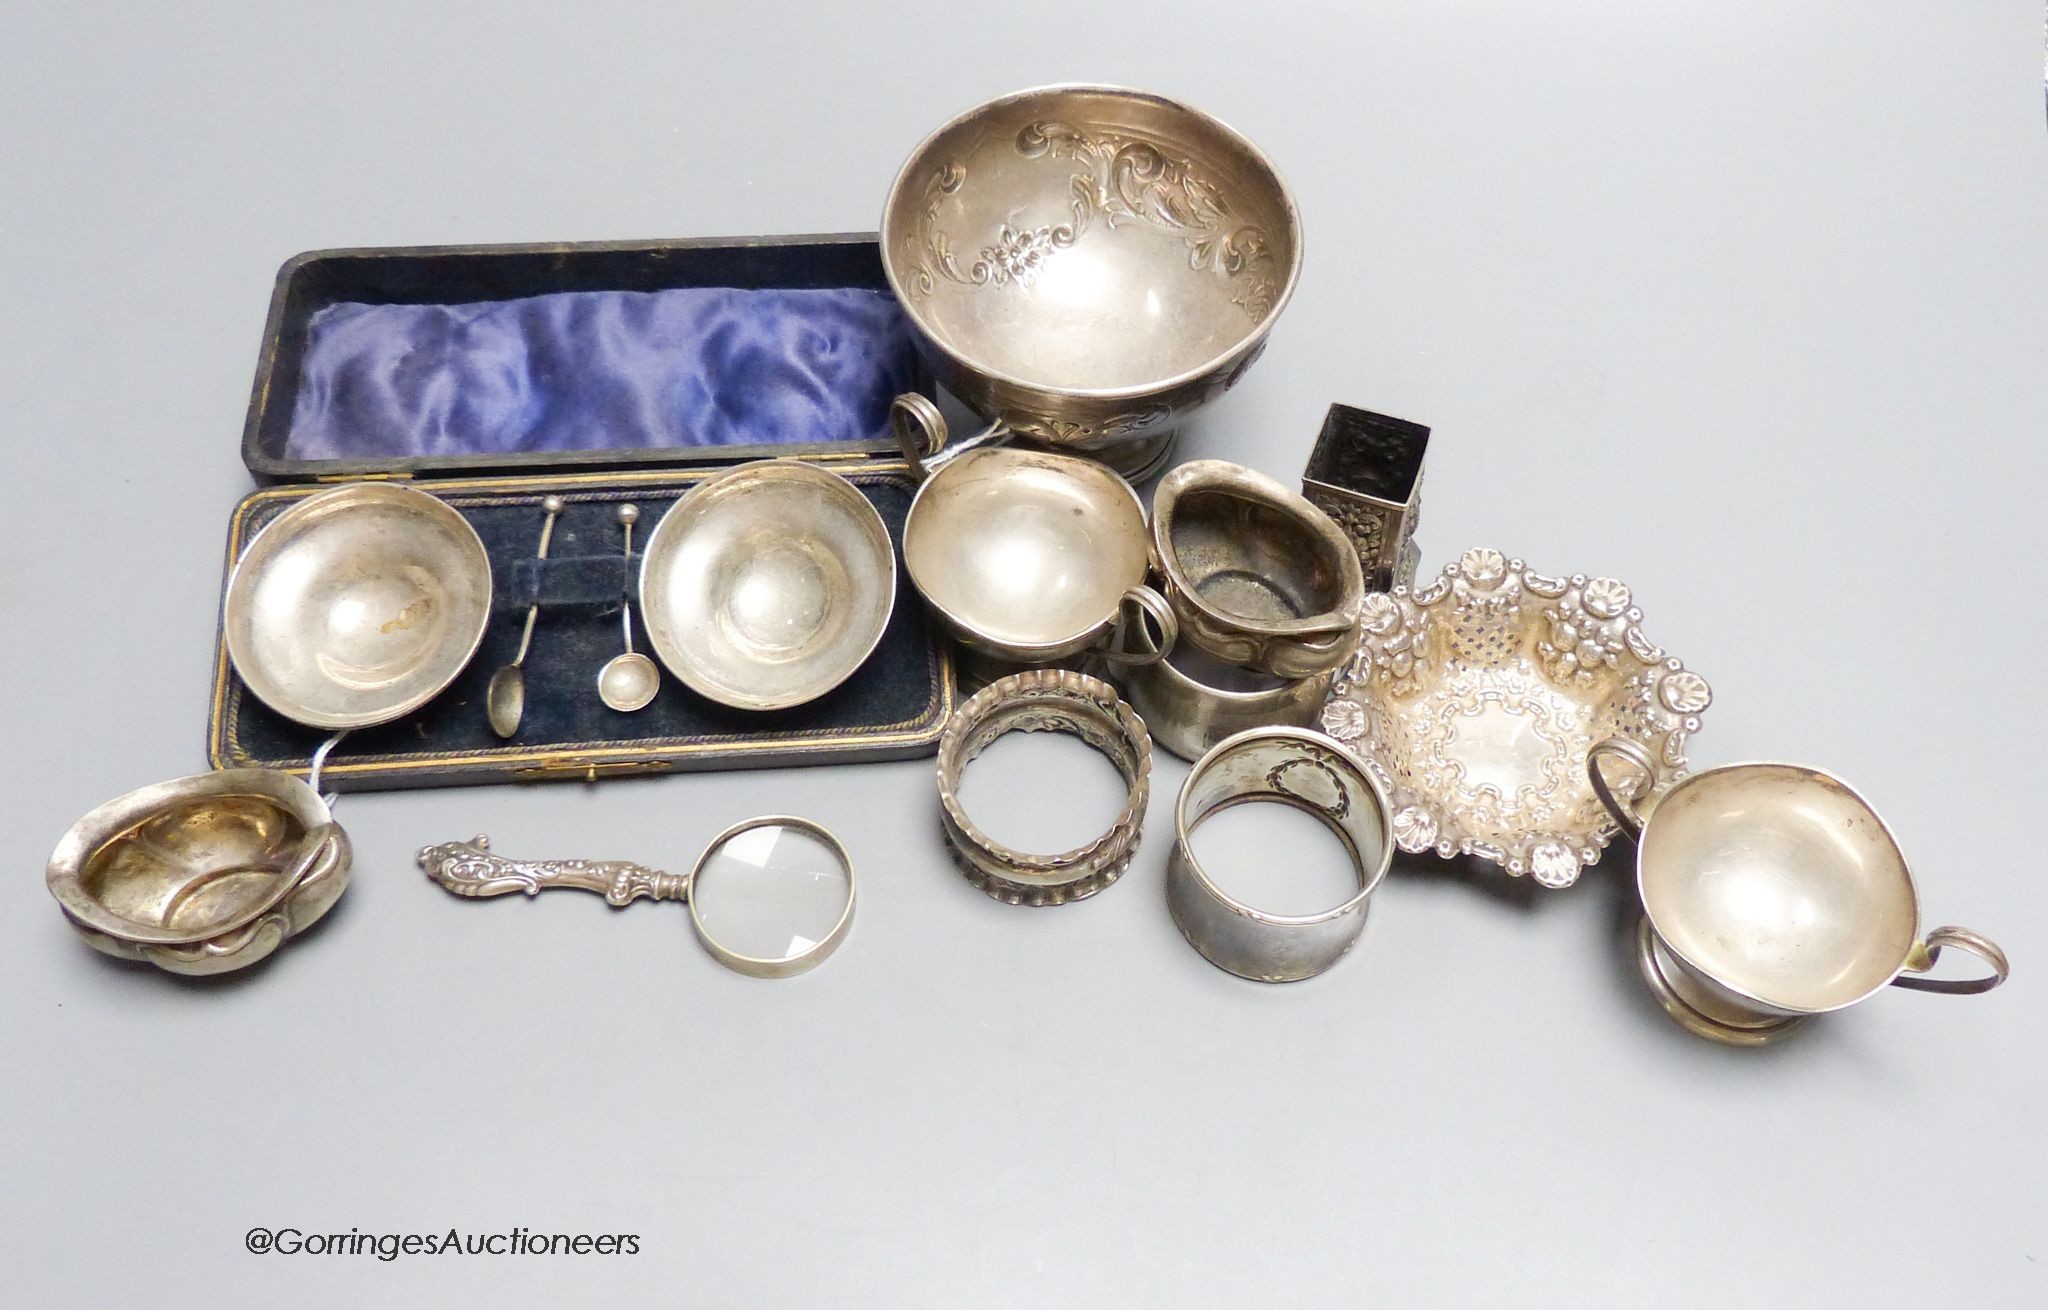 A pair of silver salts (cased), another pair of footed salts, a bowl, two napkin rings, etc. approximately 11oz. gross